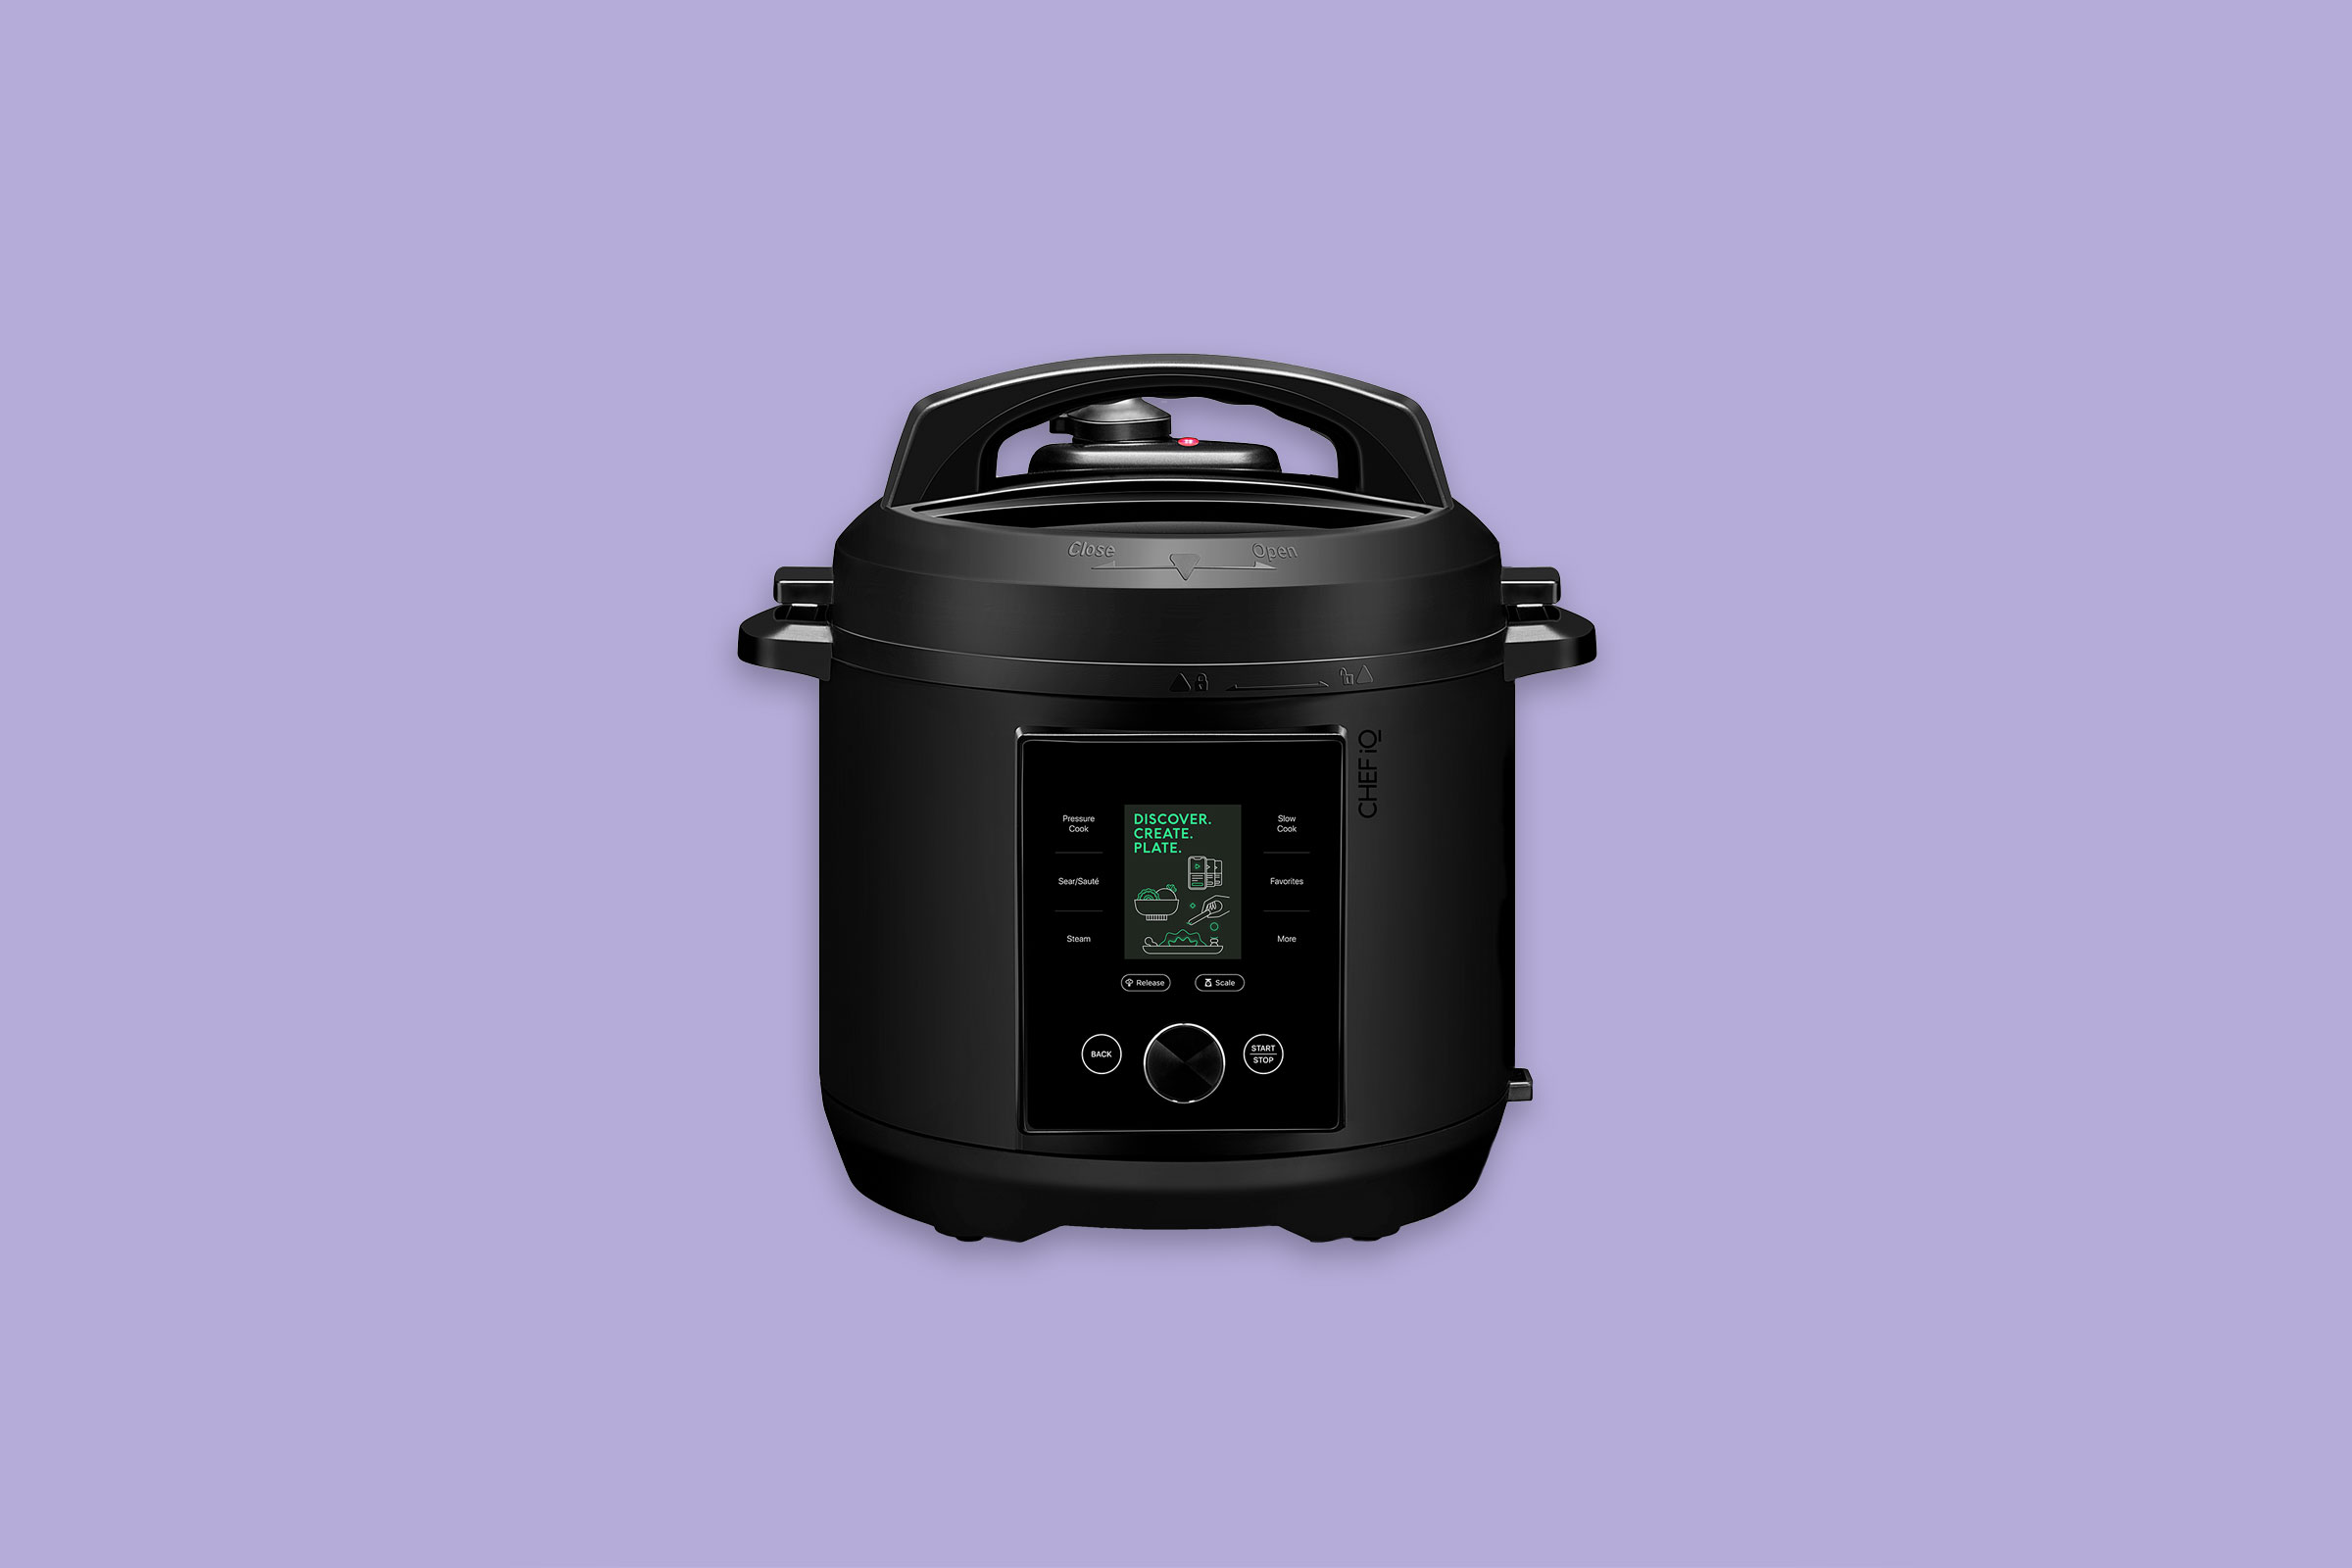 Best Inventions 2020: CHEF iQ Smart Cooker